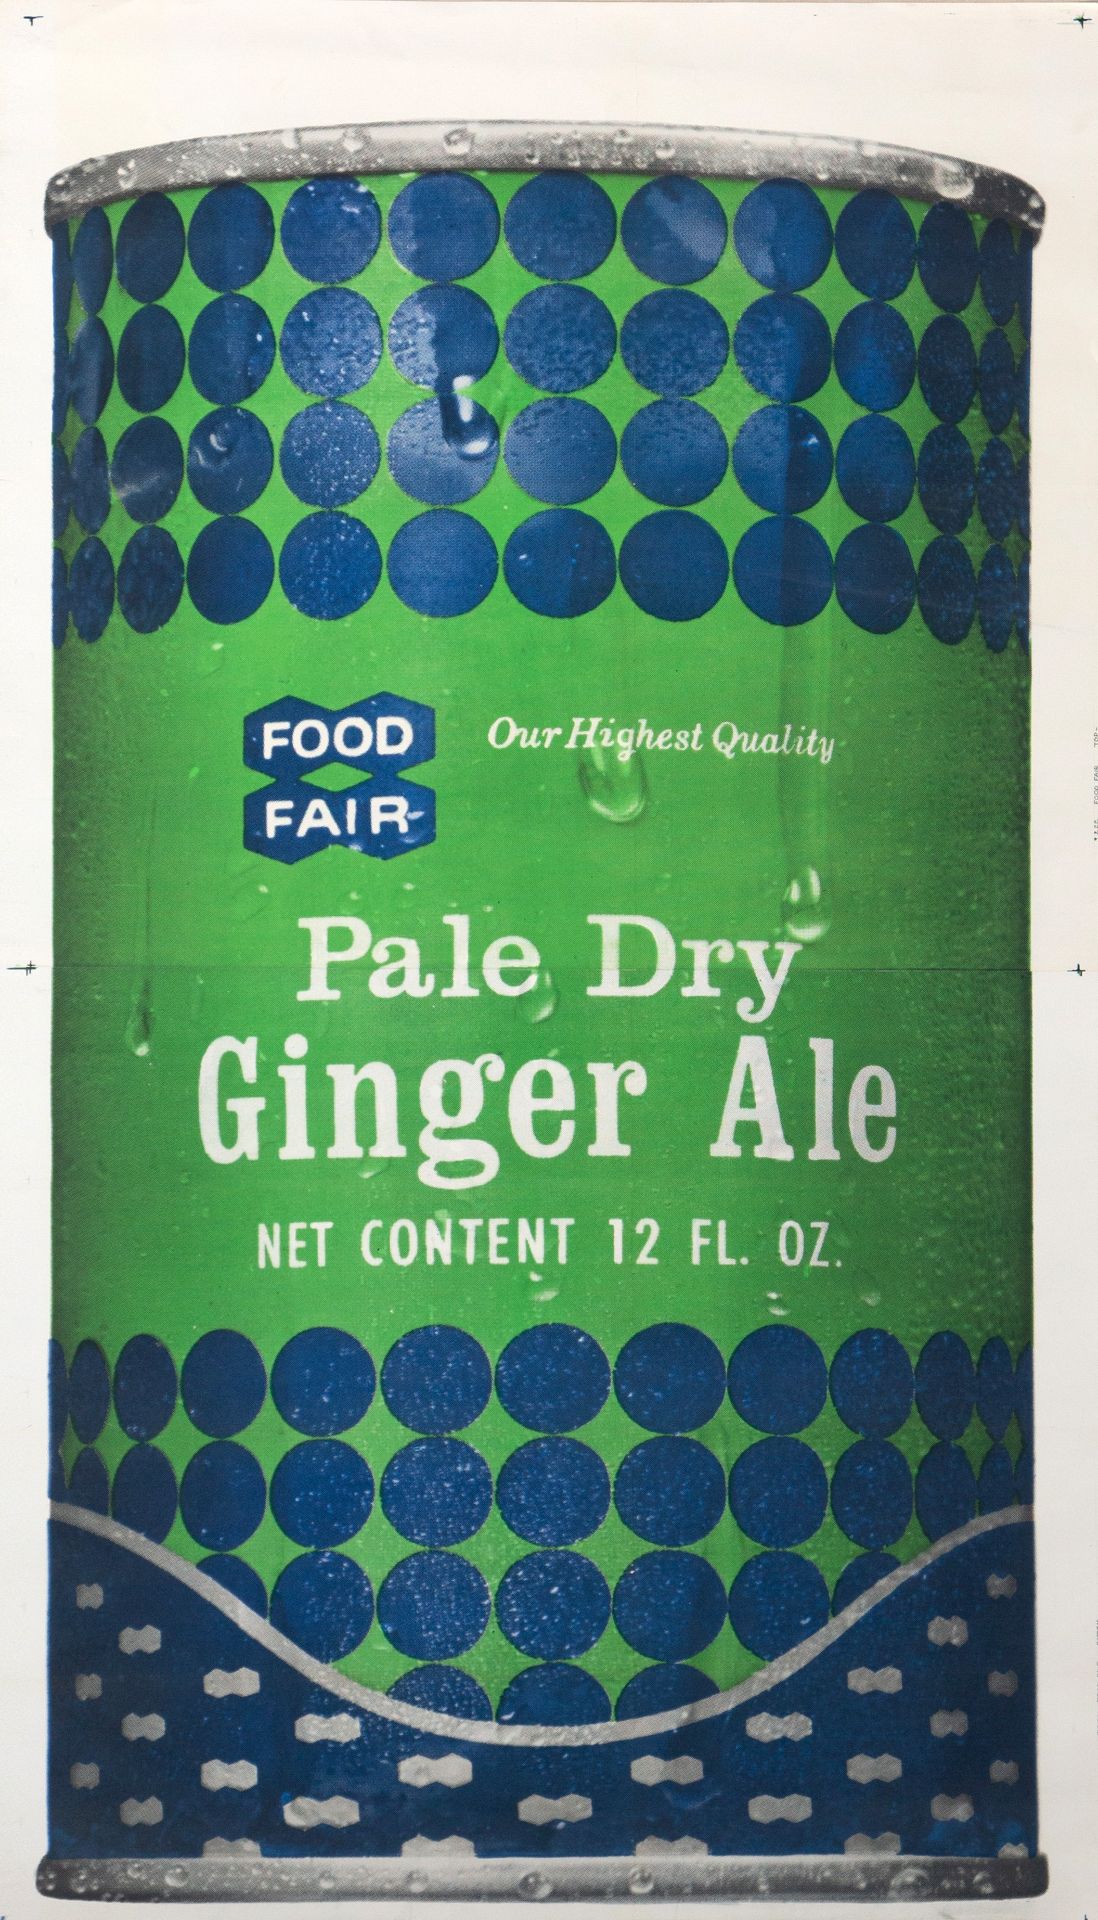 A vintage poster of 'Pale Dry Ginger Ale', lithograph, 117 x 216 cm